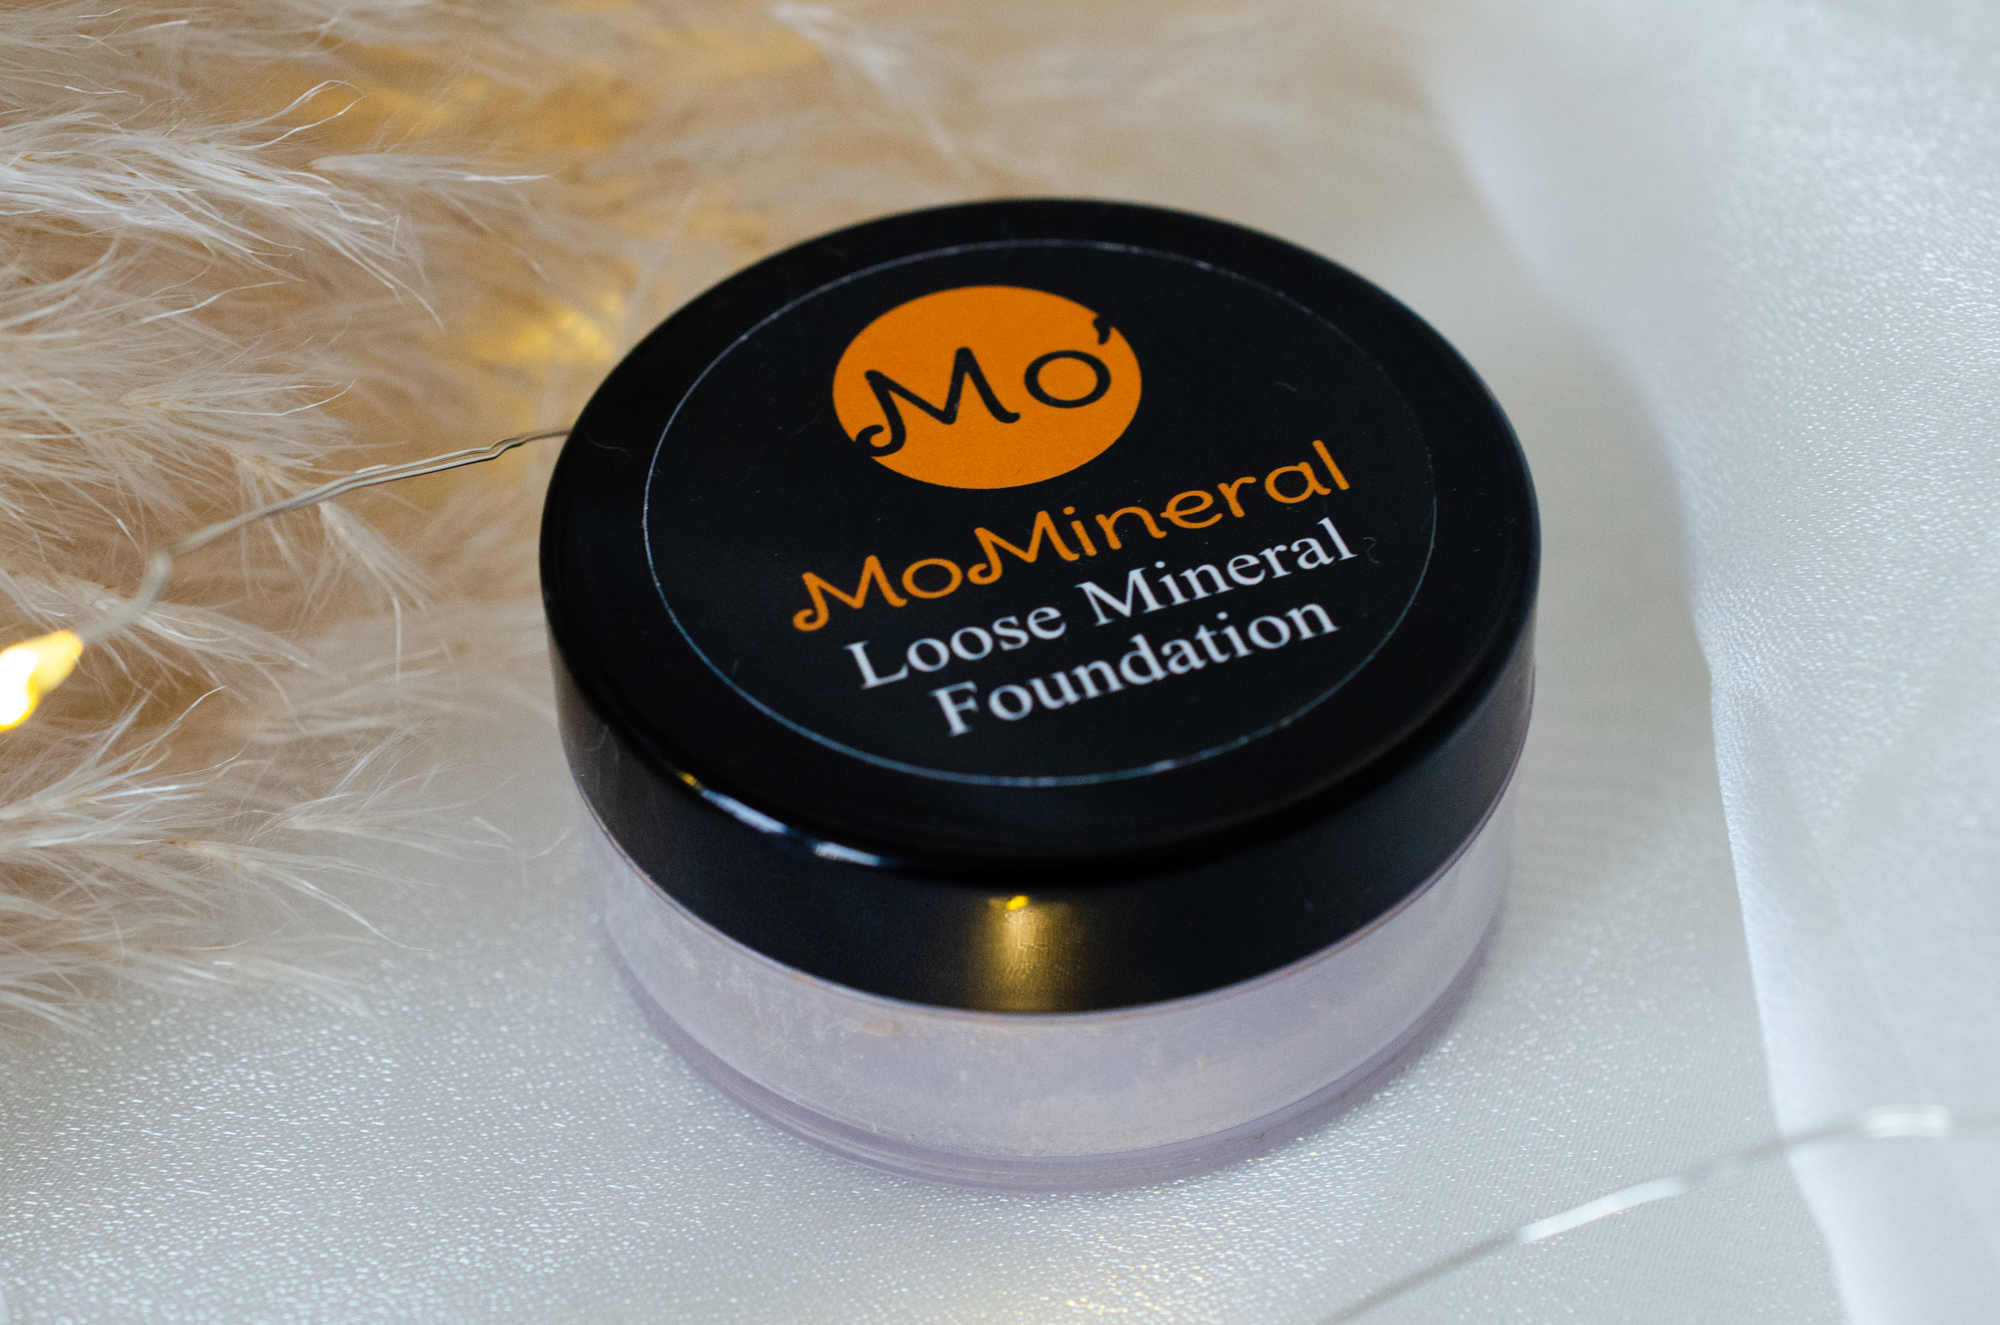 MoMineral Loose Mineral Foundation